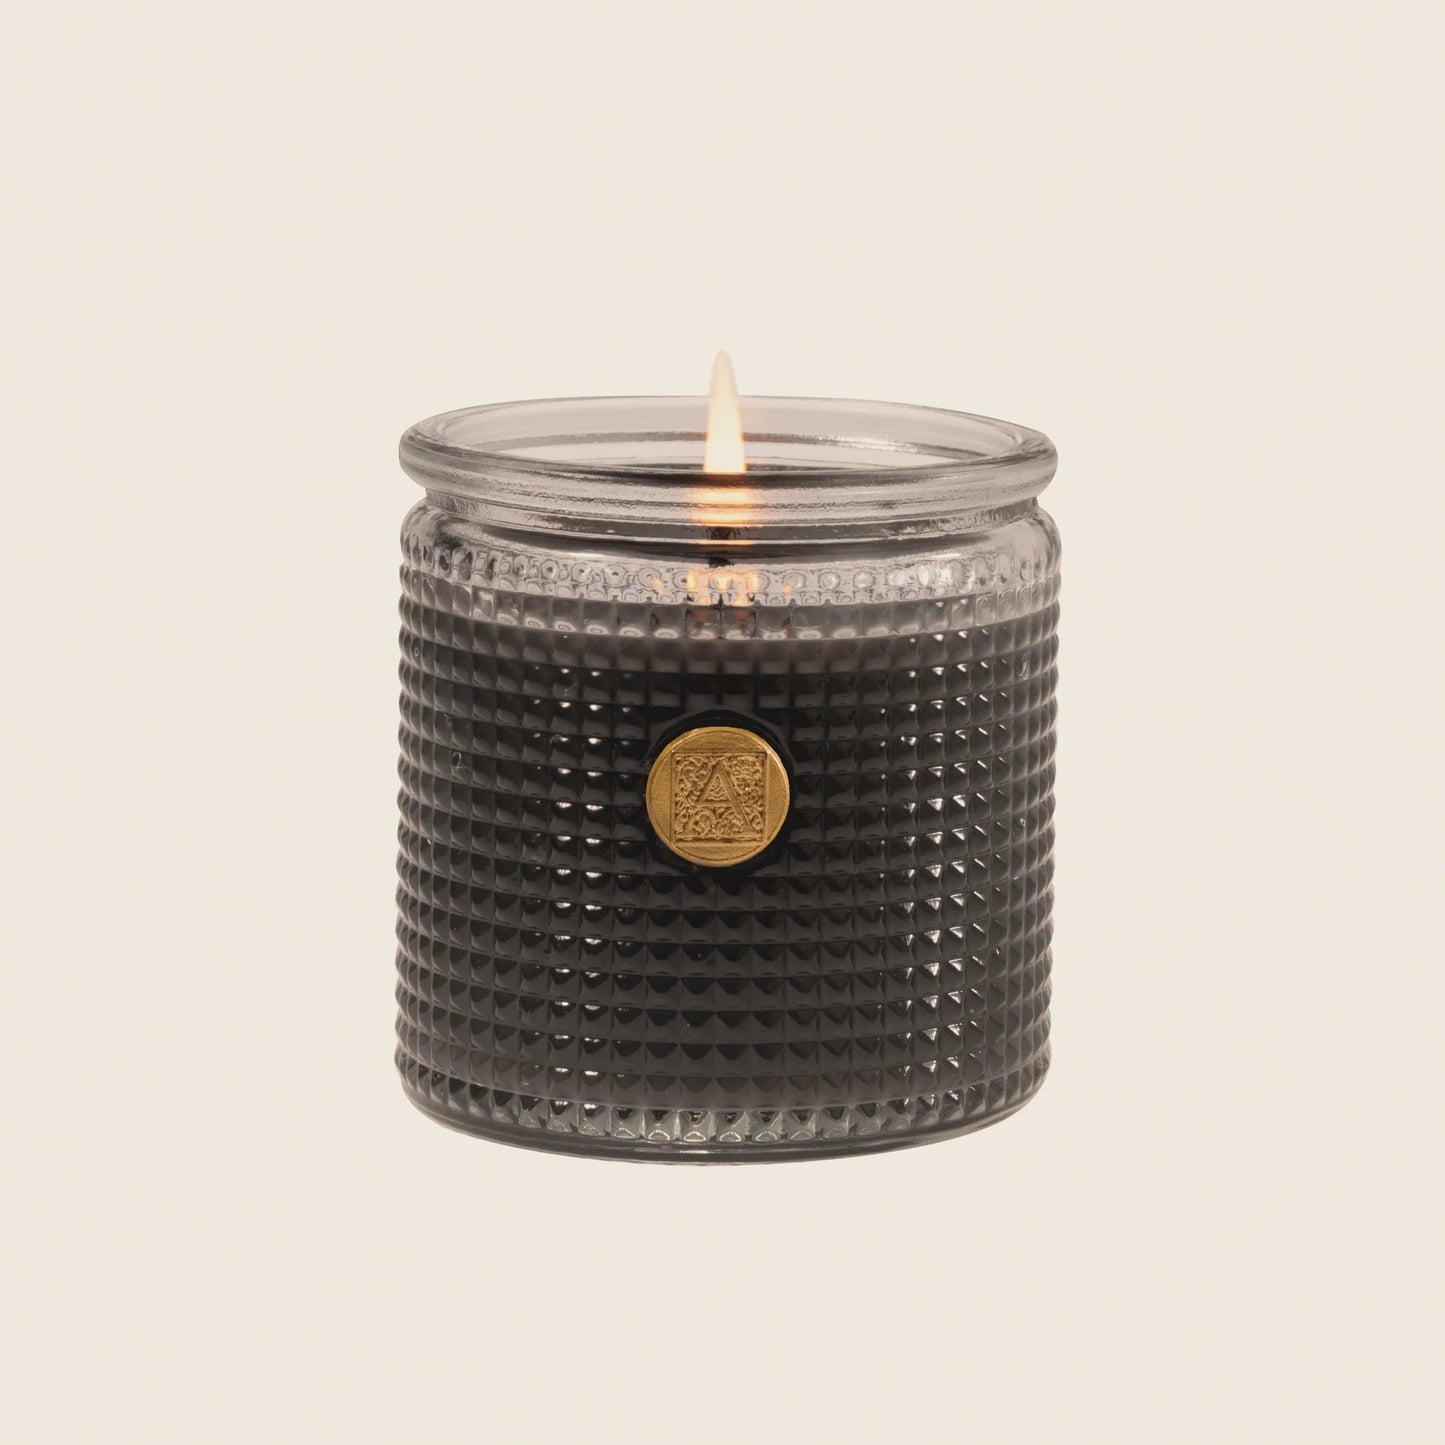 SMOKED VANILLA and SANTAL Aromatique Textured Glass 6 oz Scented Jar Candle